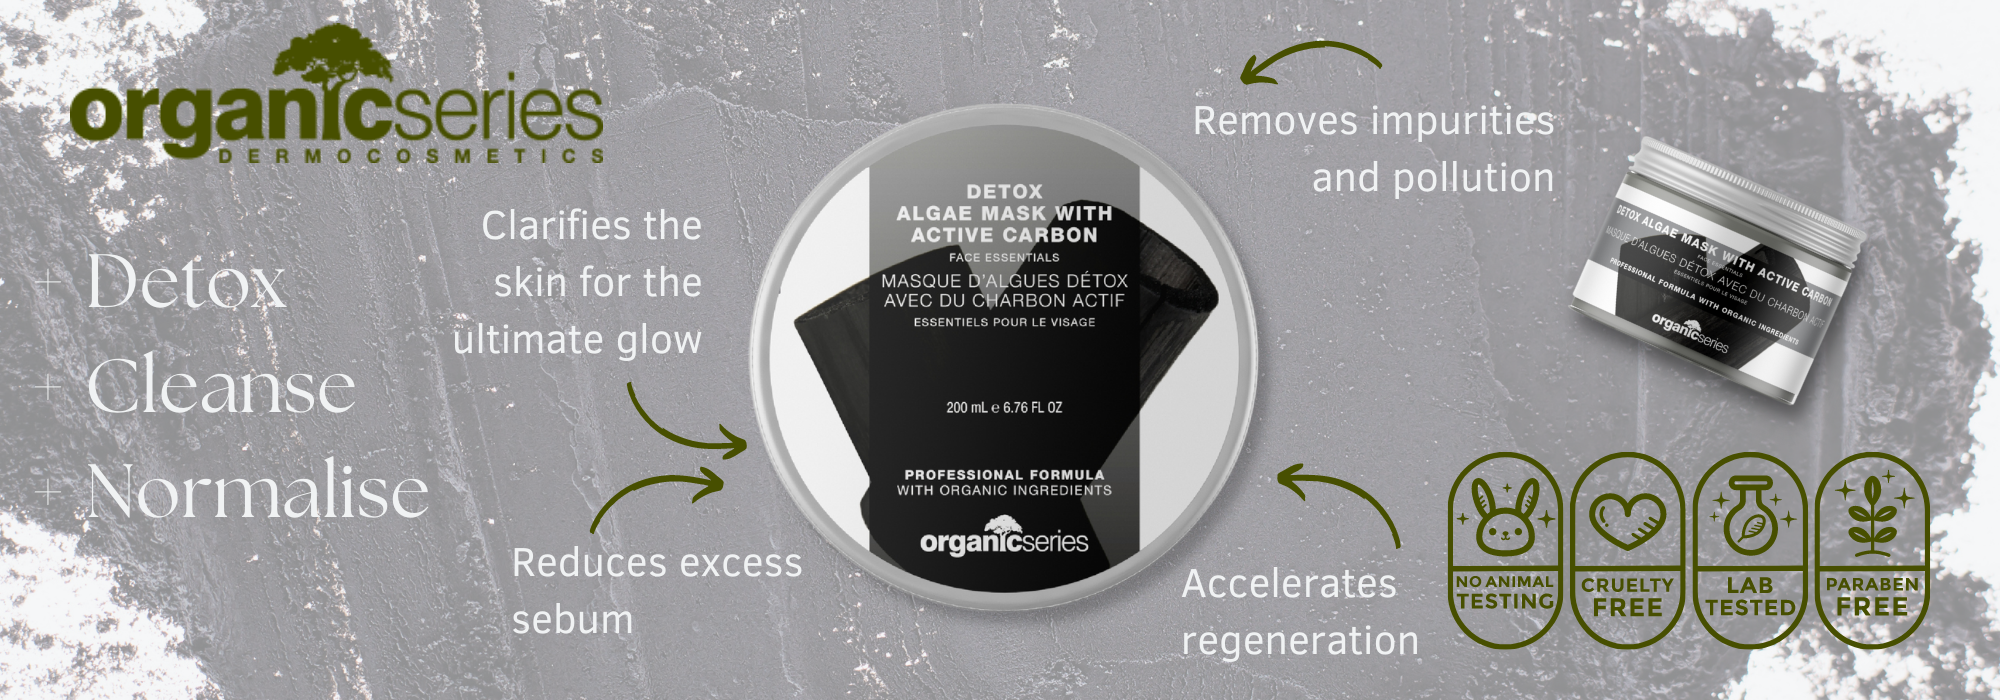  detox face mask with algae and active carbon by organic series